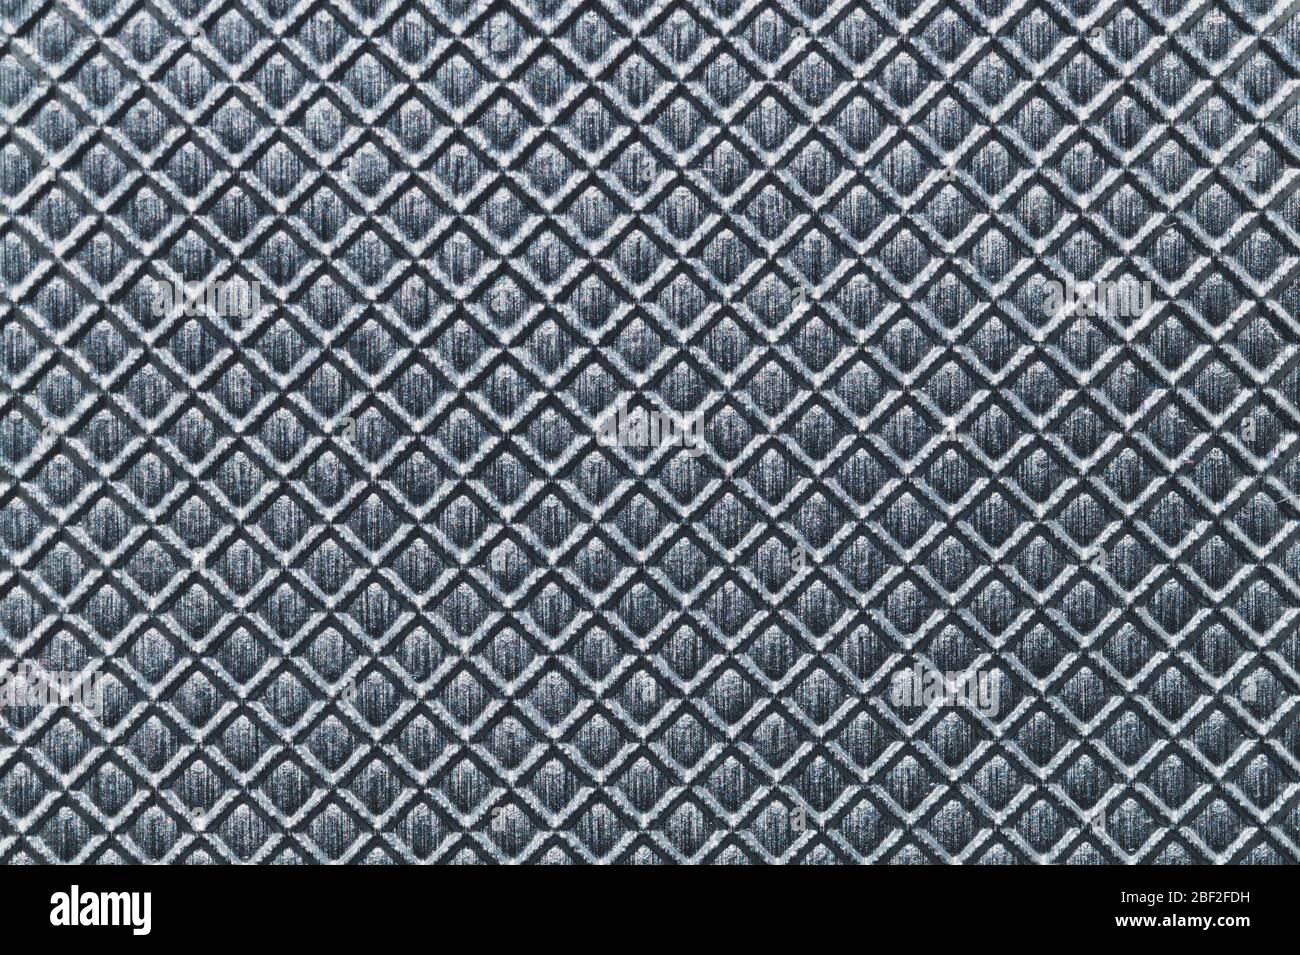 Squared grid abstract background. gray plastic texture. pattern with square shaped cells Stock Photo